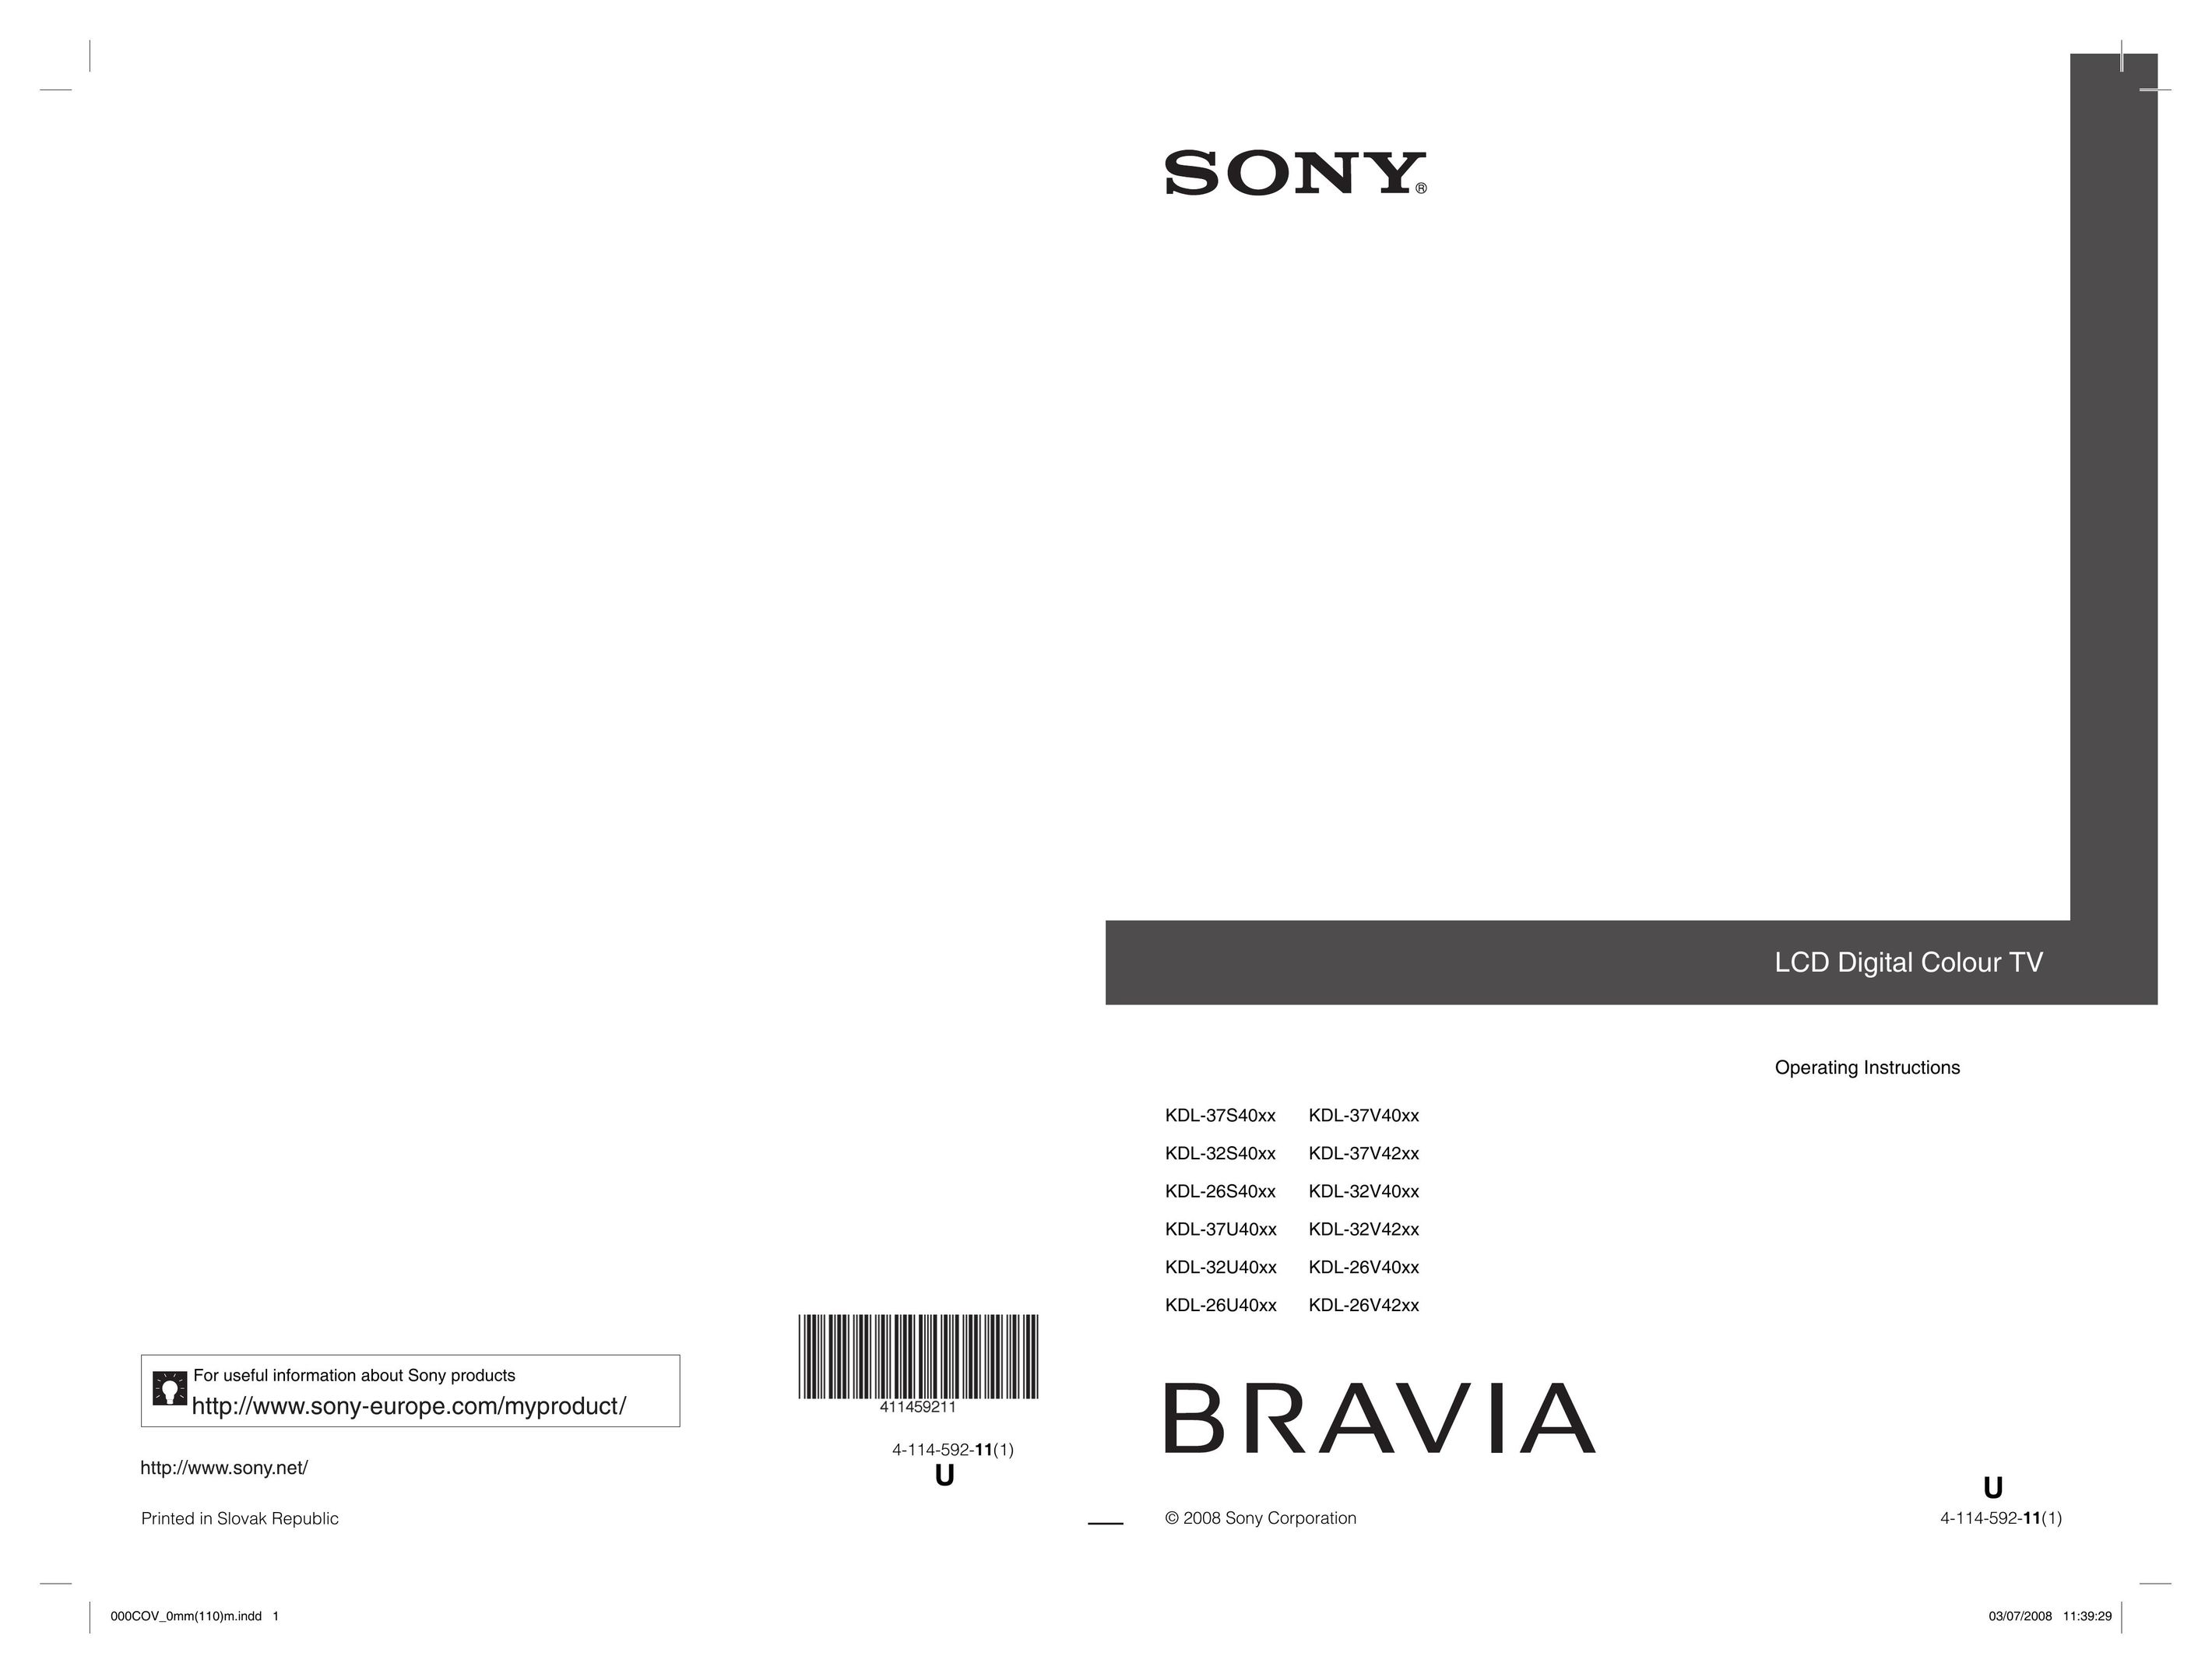 Sony 4-114-592-11(1) Flat Panel Television User Manual